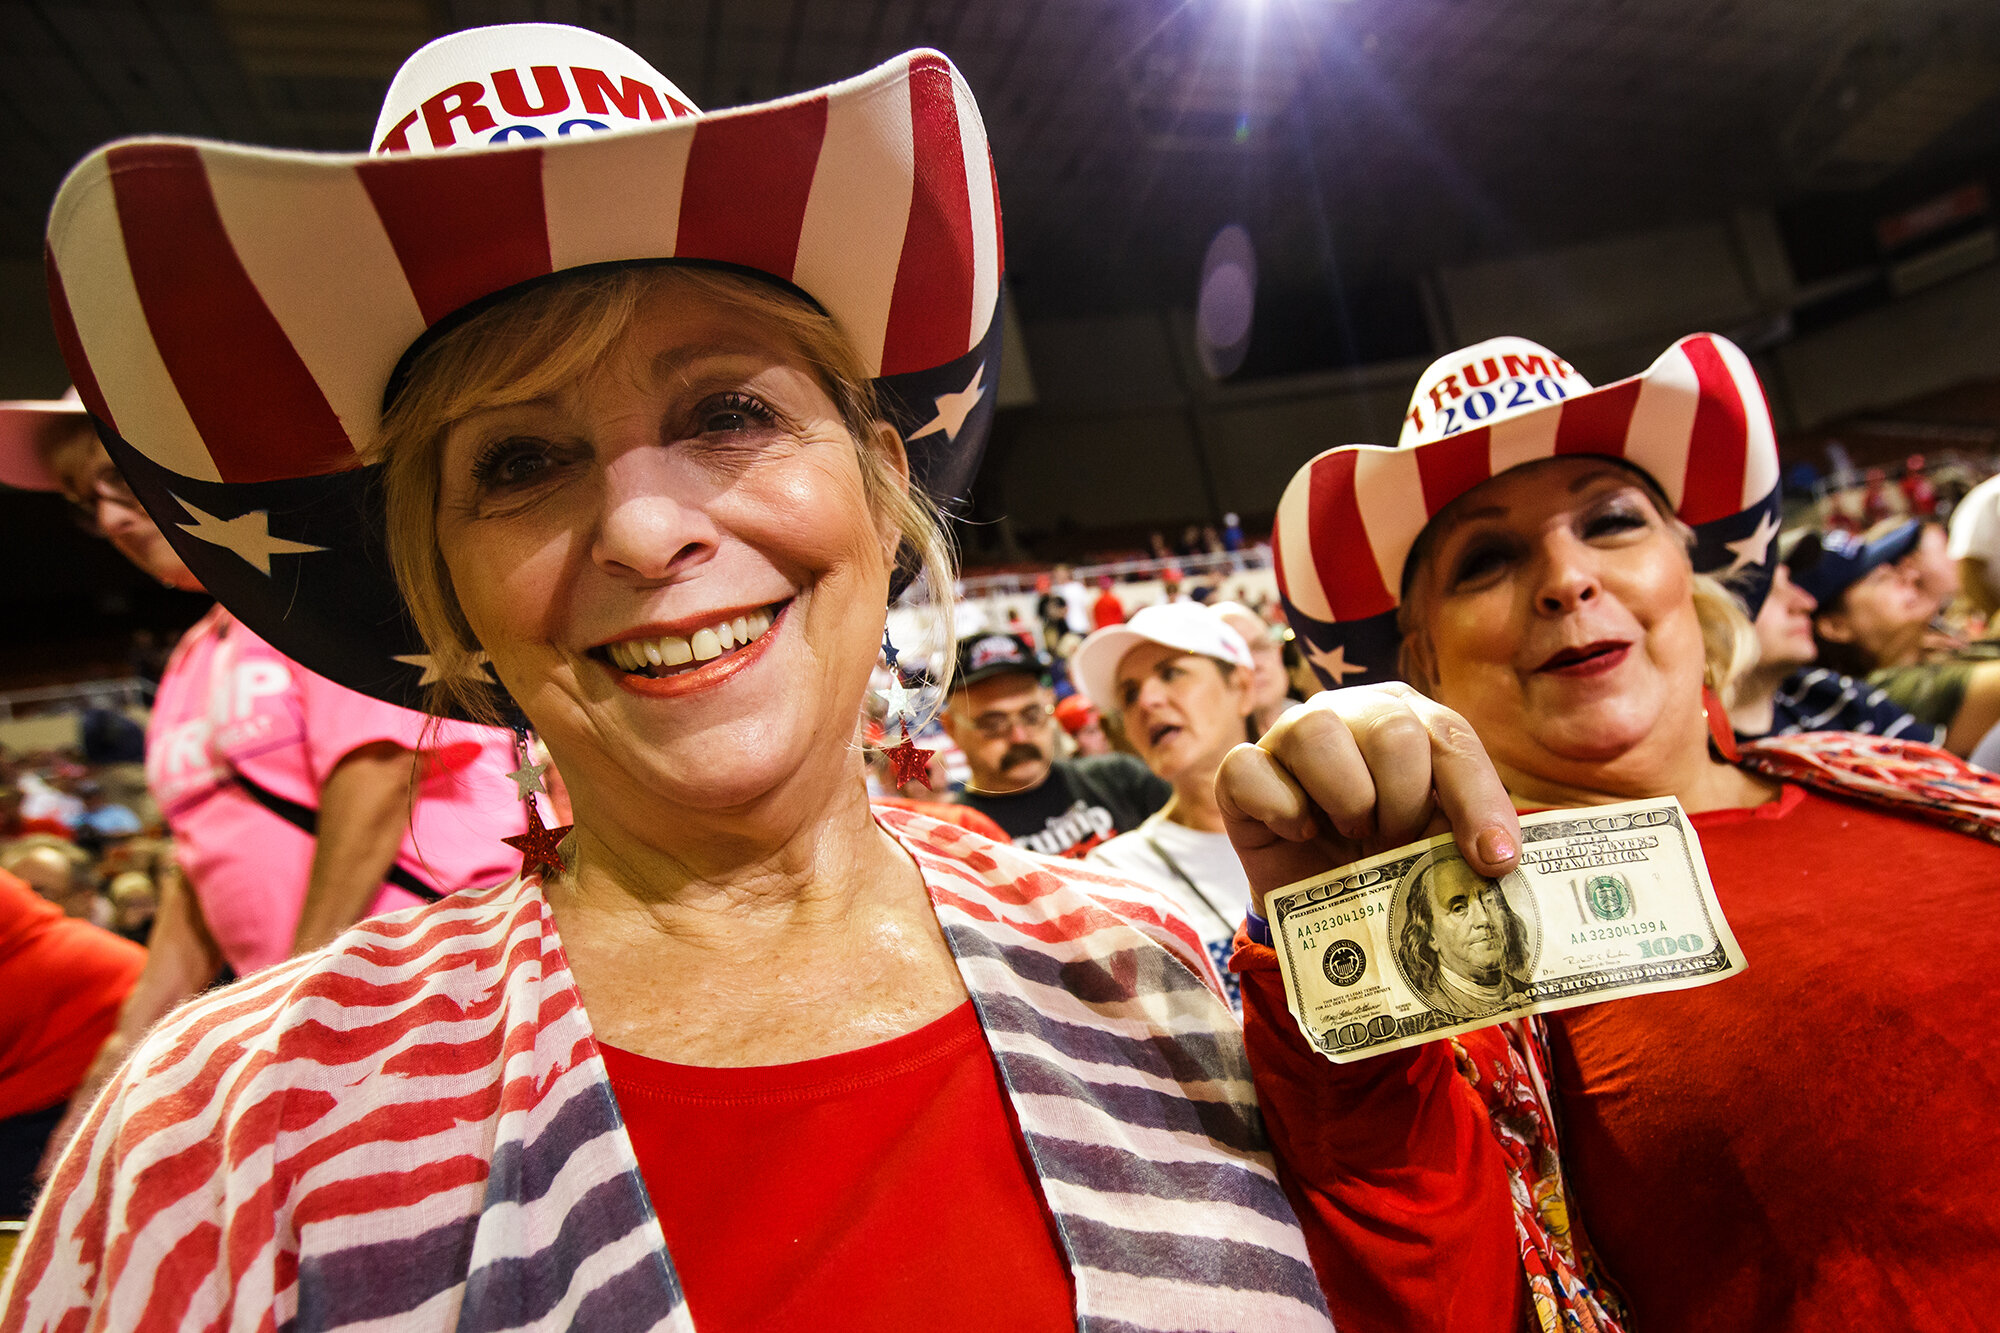  Ann Marie Pierson, and her sister, Theresa Kendinian, both of Pasadena, Calif., enjoy themselves as they wait for the arrival of President Donald Trump at a campaign event for his re-election, at the Arizona Veterans Memorial Coliseum in Phoenix, Ar